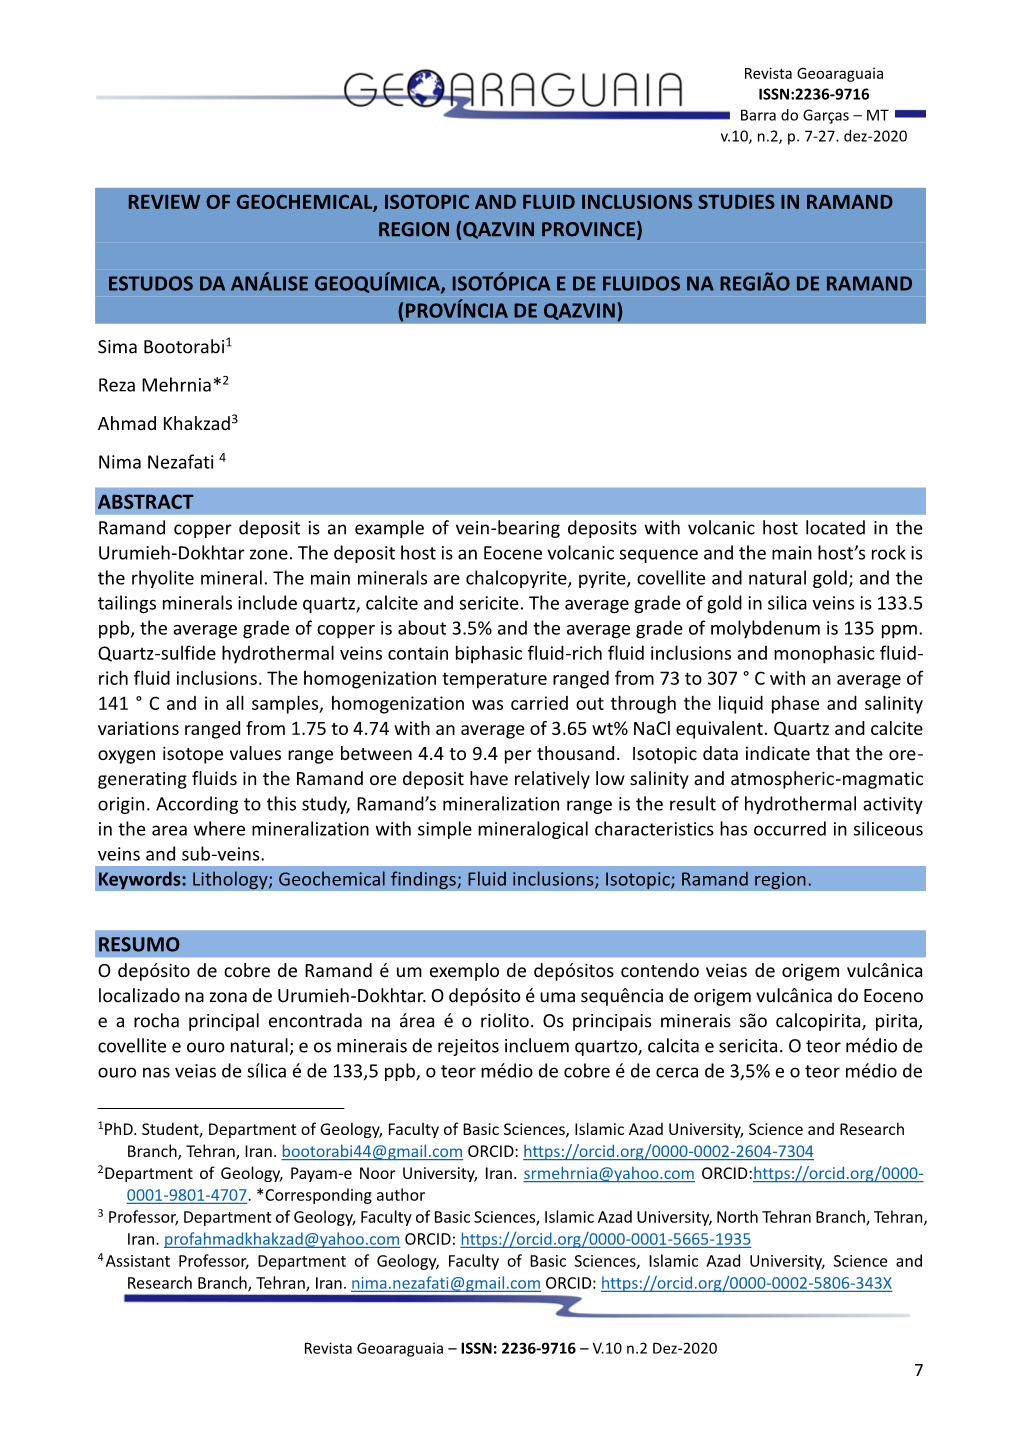 Review of Geochemical, Isotopic and Fluid Inclusions Studies in Ramand Region (Qazvin Province)